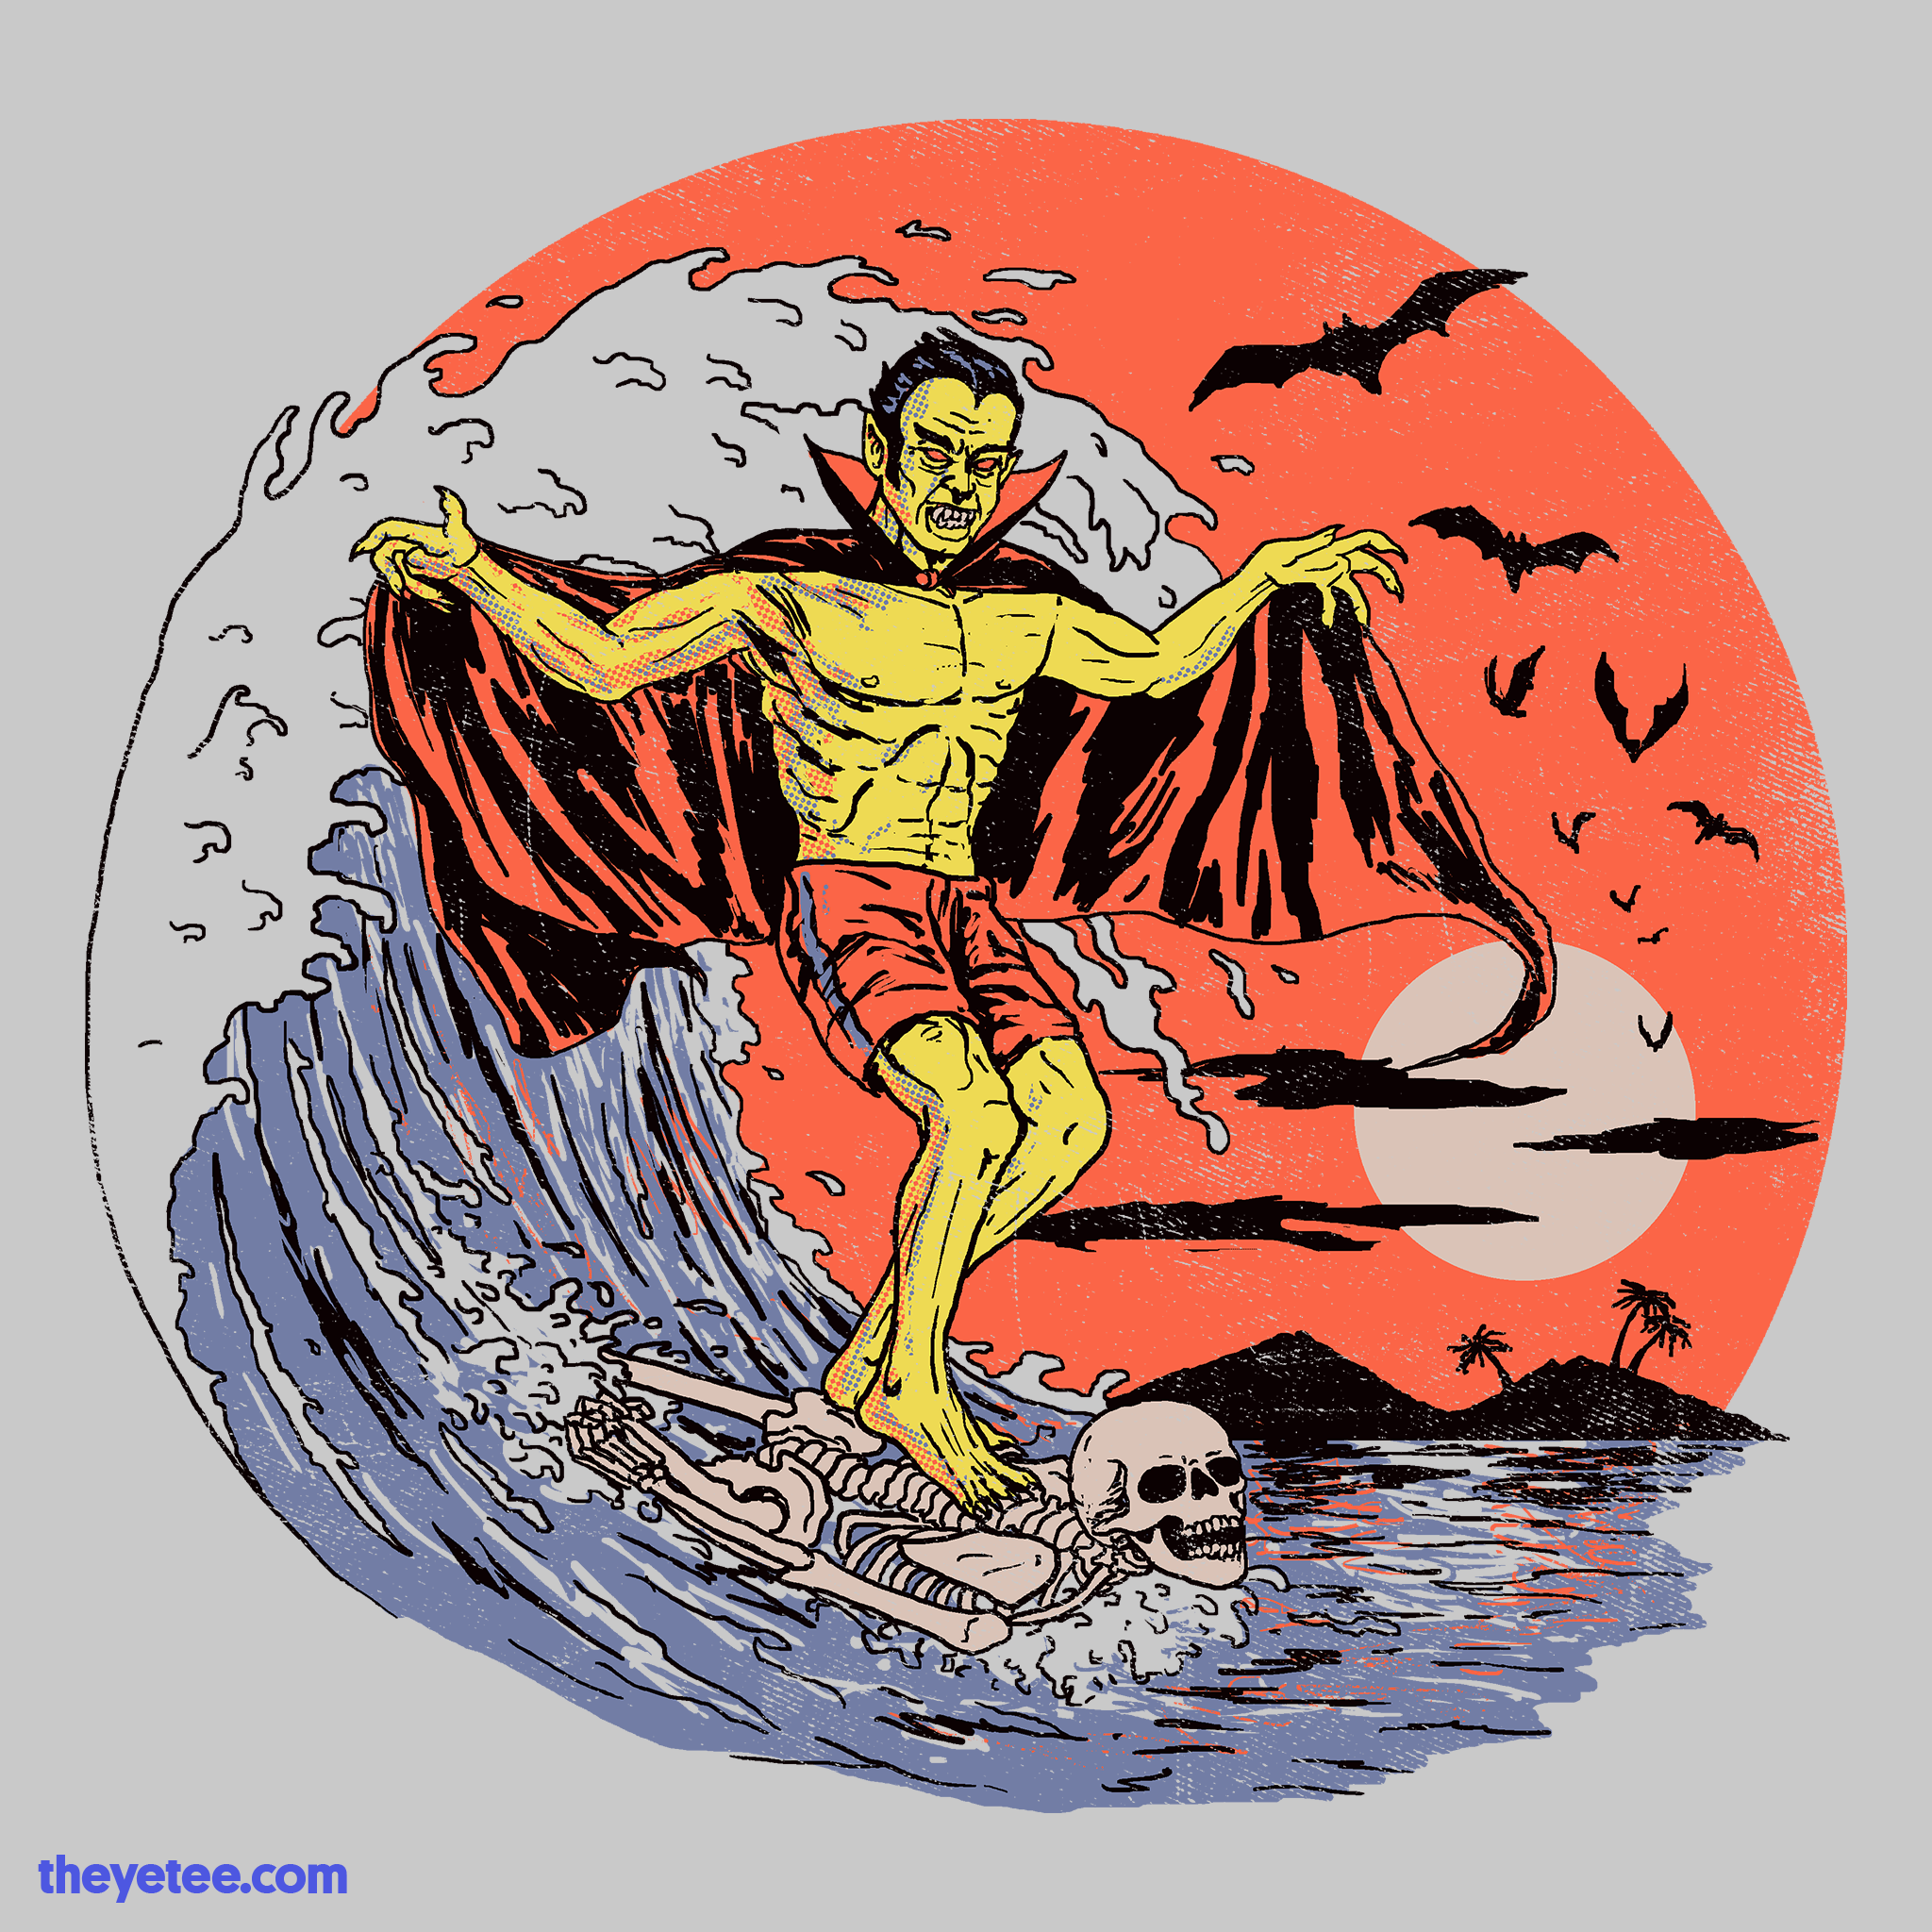 Image of Body Surfer